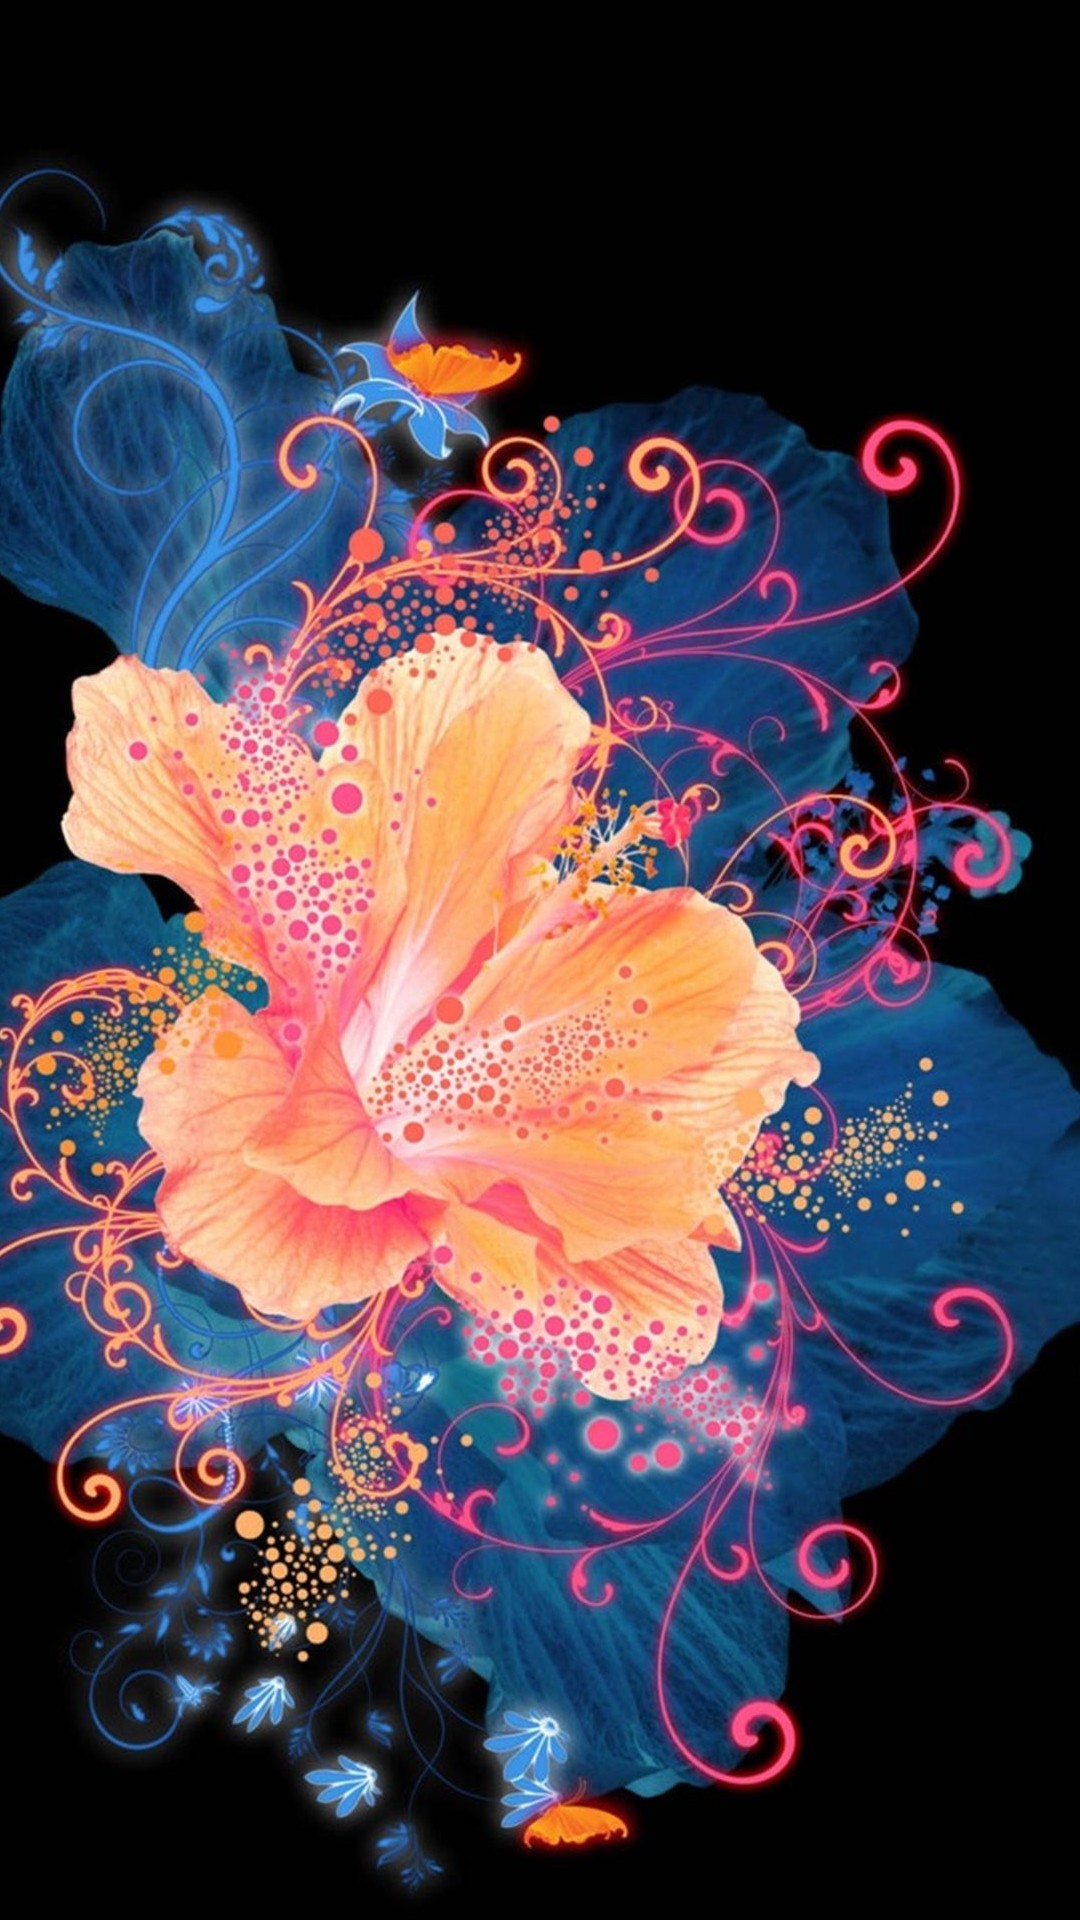 1080x1920 HD Abstract Flower Neon Painting Android Wallpaper ...